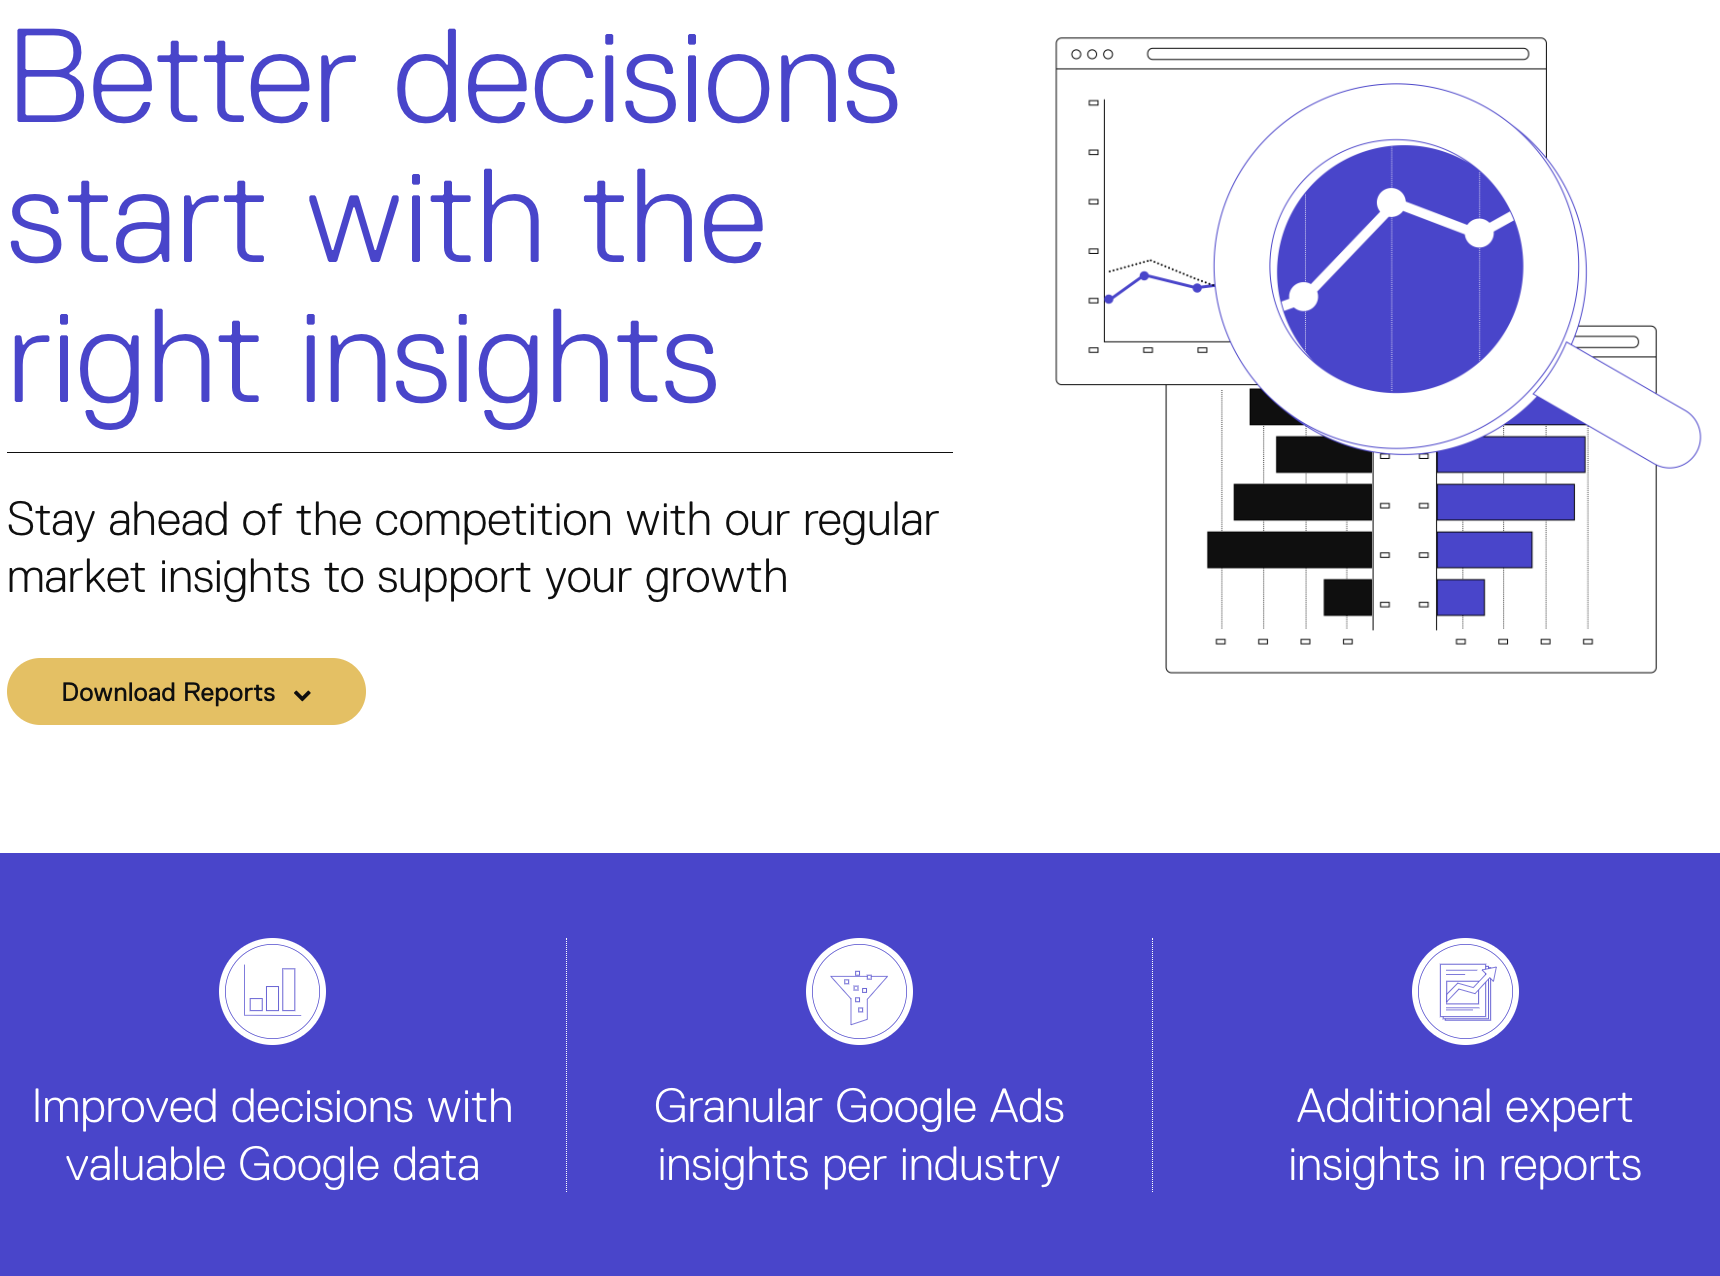 A picture of smec's website showing the "Trends and Reports" section, offering detailed Google ads insights into your industry. 